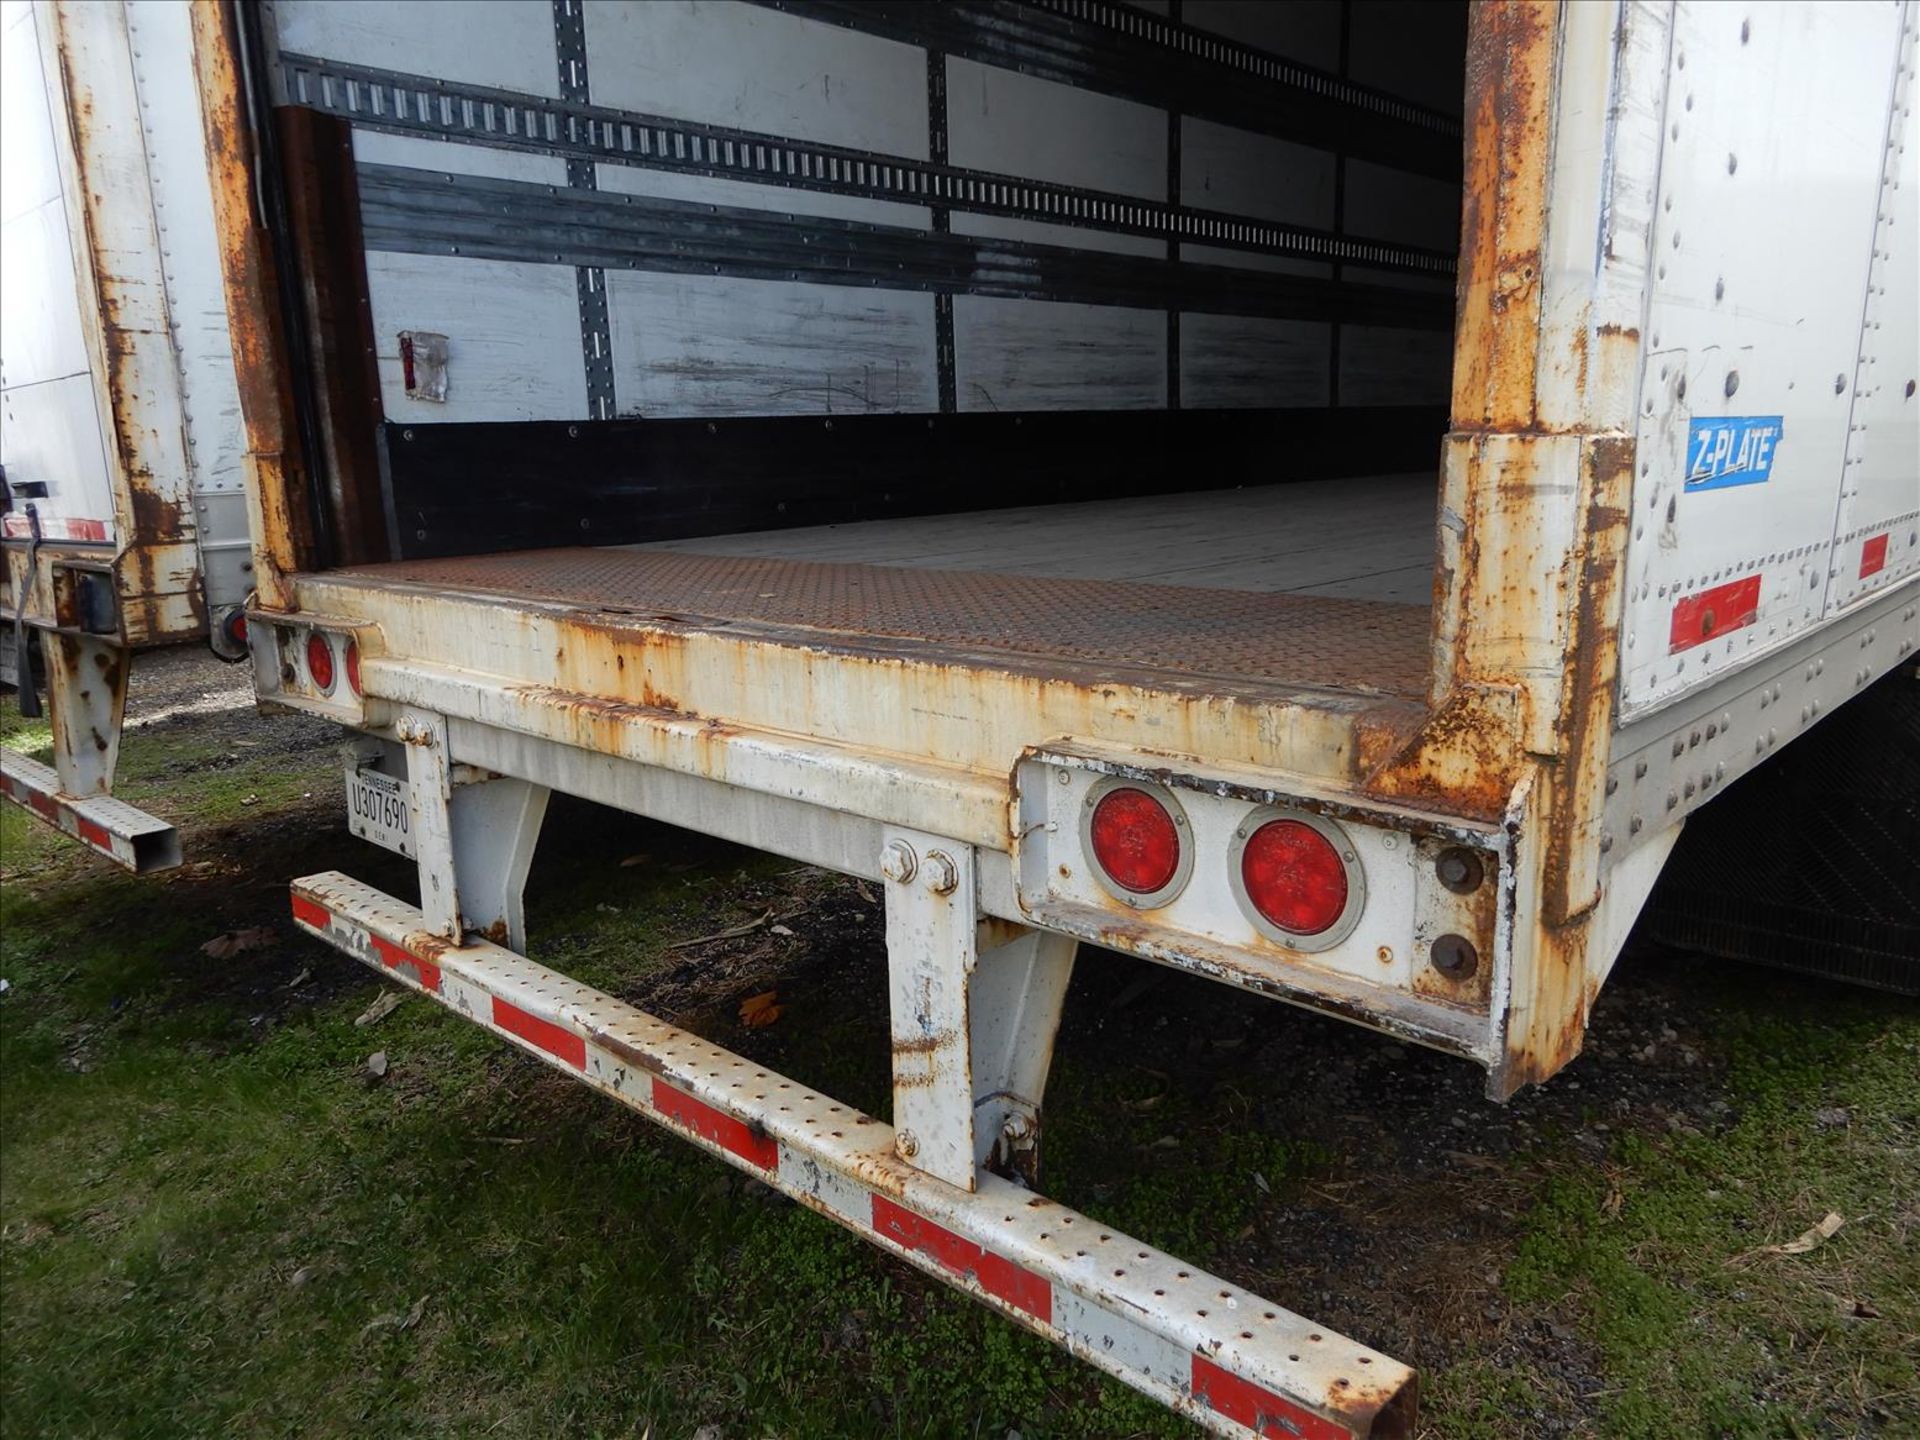 2012 Stoughton Trailer - Located in Indianapolis, IN - Image 20 of 31